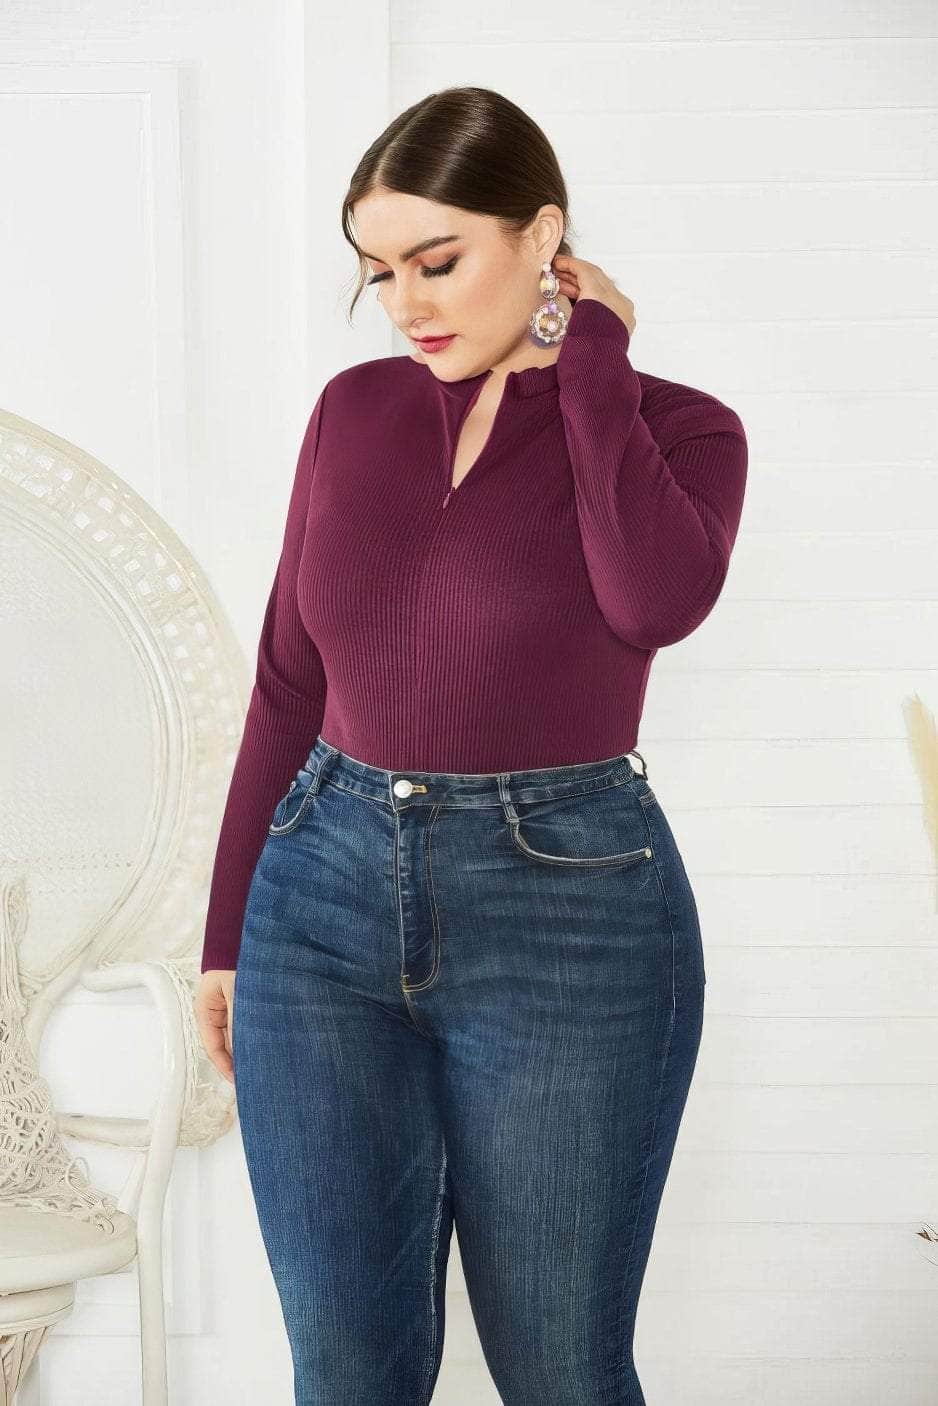 Plus Size Long Sleeves Rib Knitted Turtle Neck Bodysuit